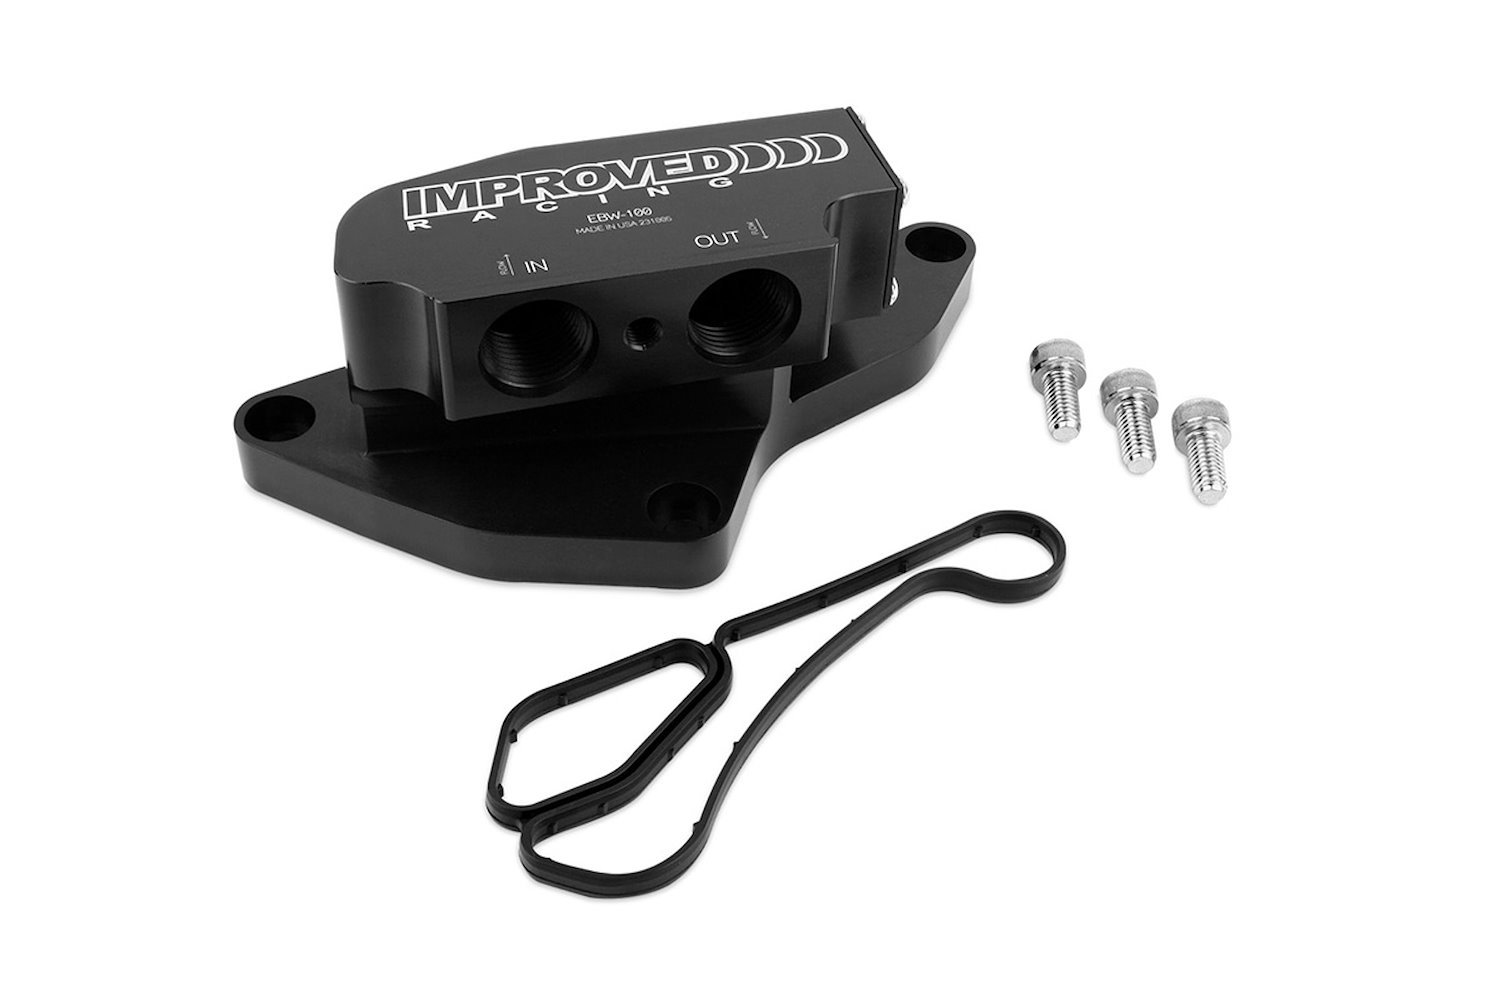 EBW-100-T7 Oil Cooler Adapter For BMW Engines, 212-degrees F Thermostat